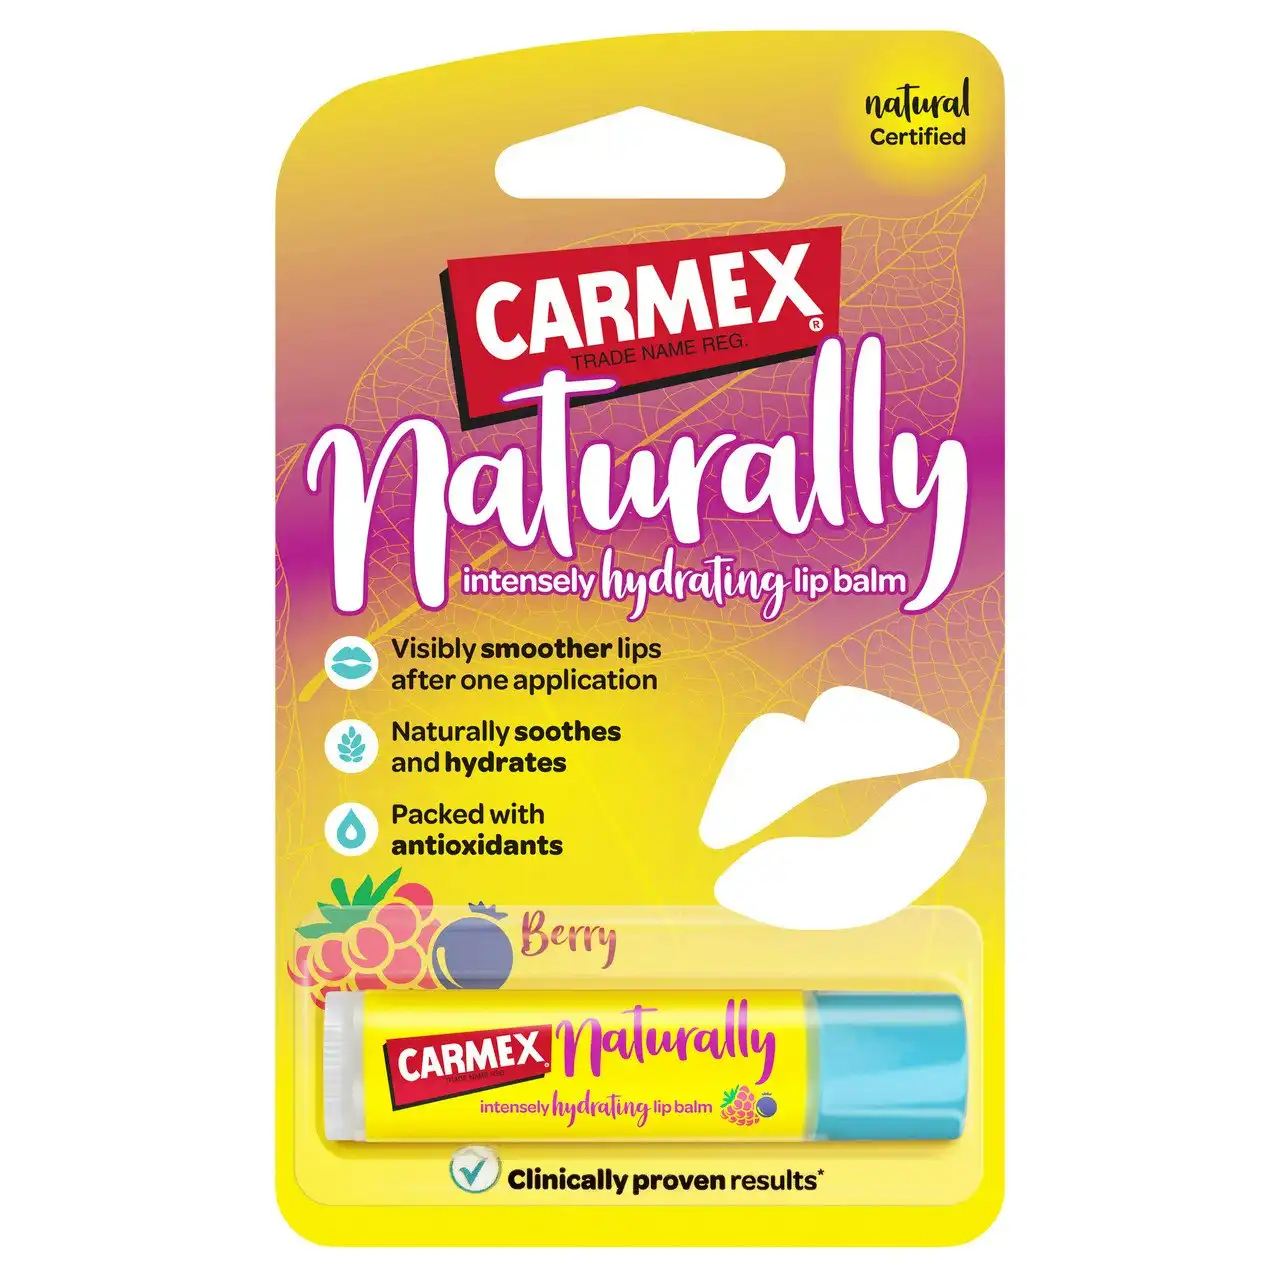 Carmex 'NATURALLY' BERRY intensely hydrating lip balm